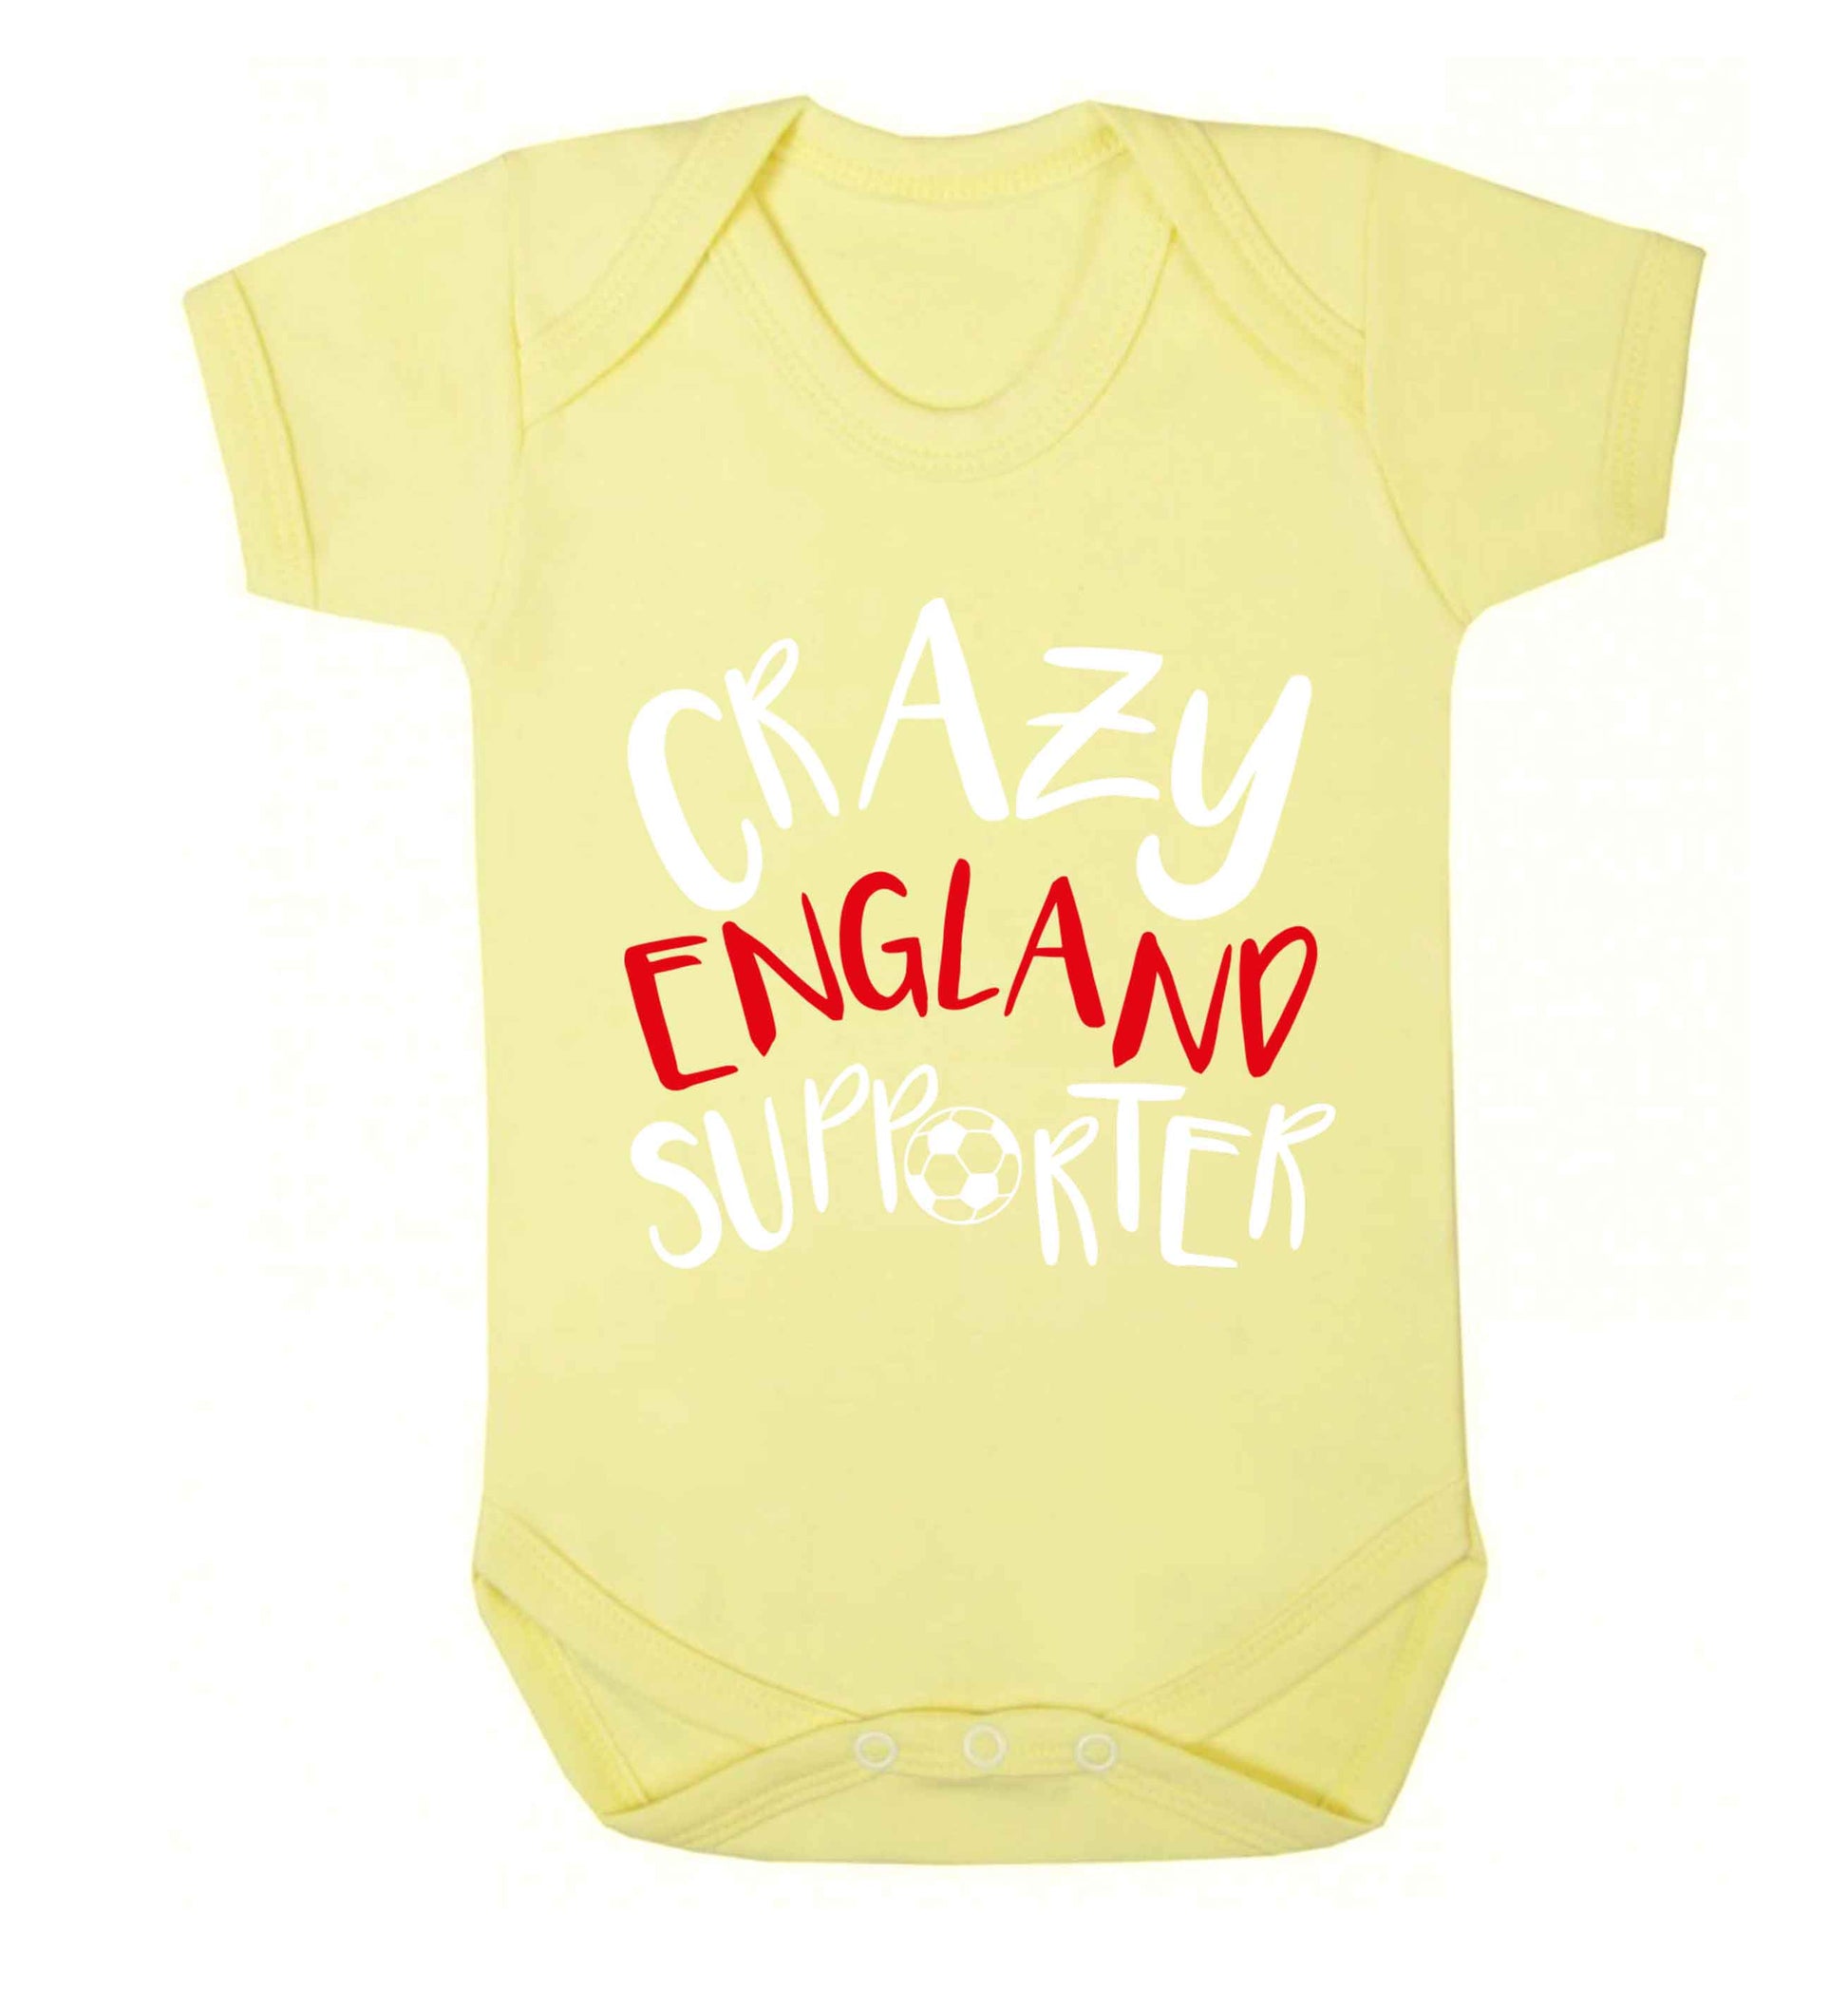 Crazy England supporter Baby Vest pale yellow 18-24 months